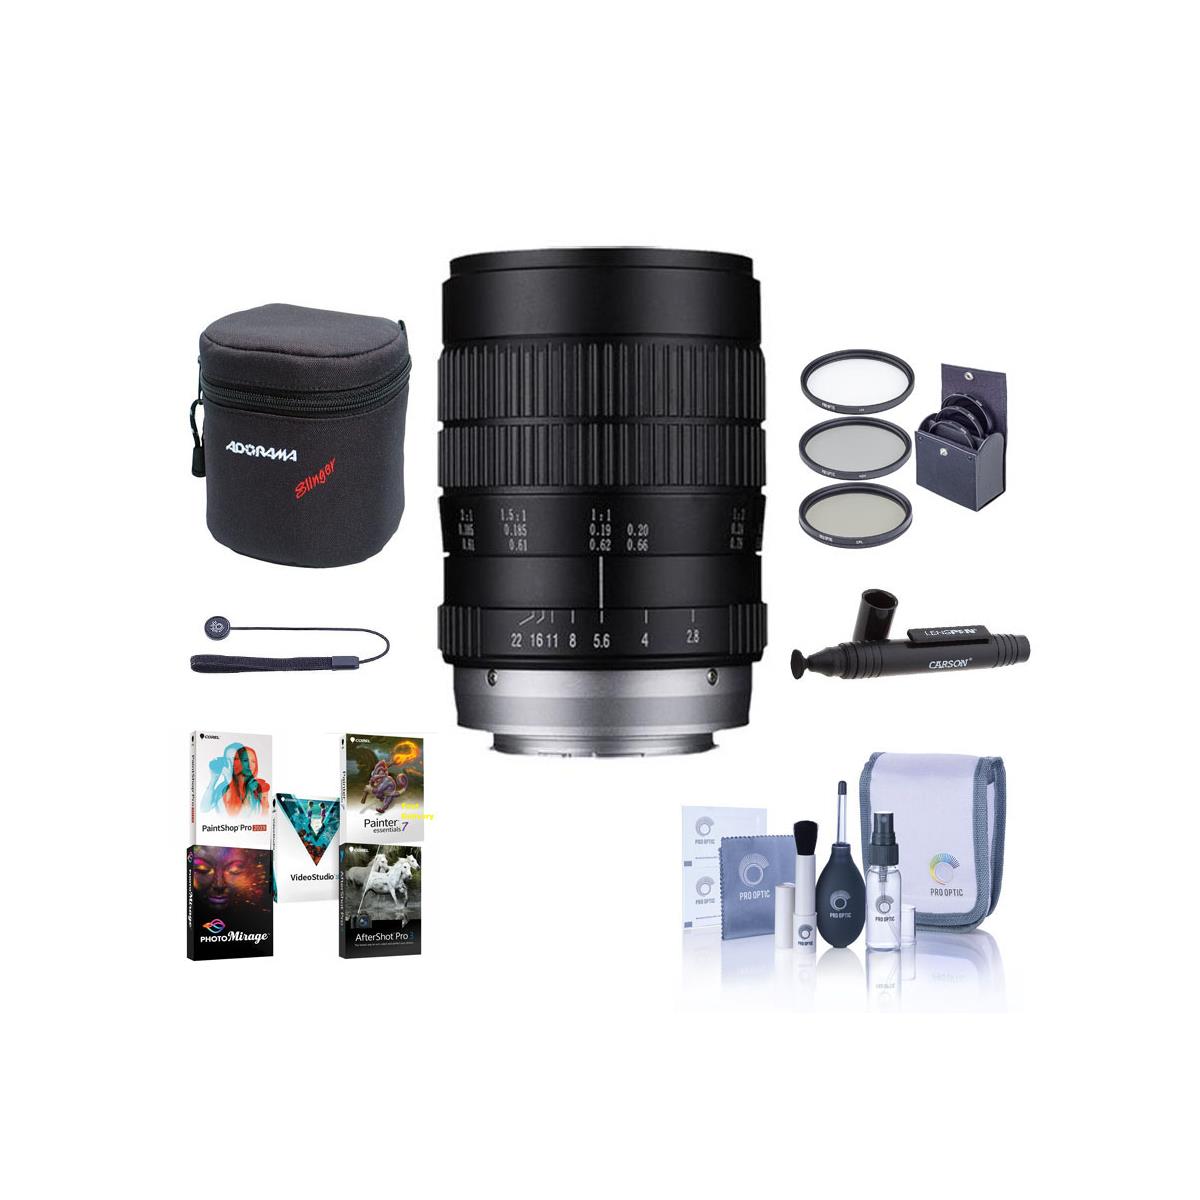 Venus Laowa 60mm f/2.8 Ultra Macro Lens for Canon EF with Free Accessories Kit -  VEN6028C A